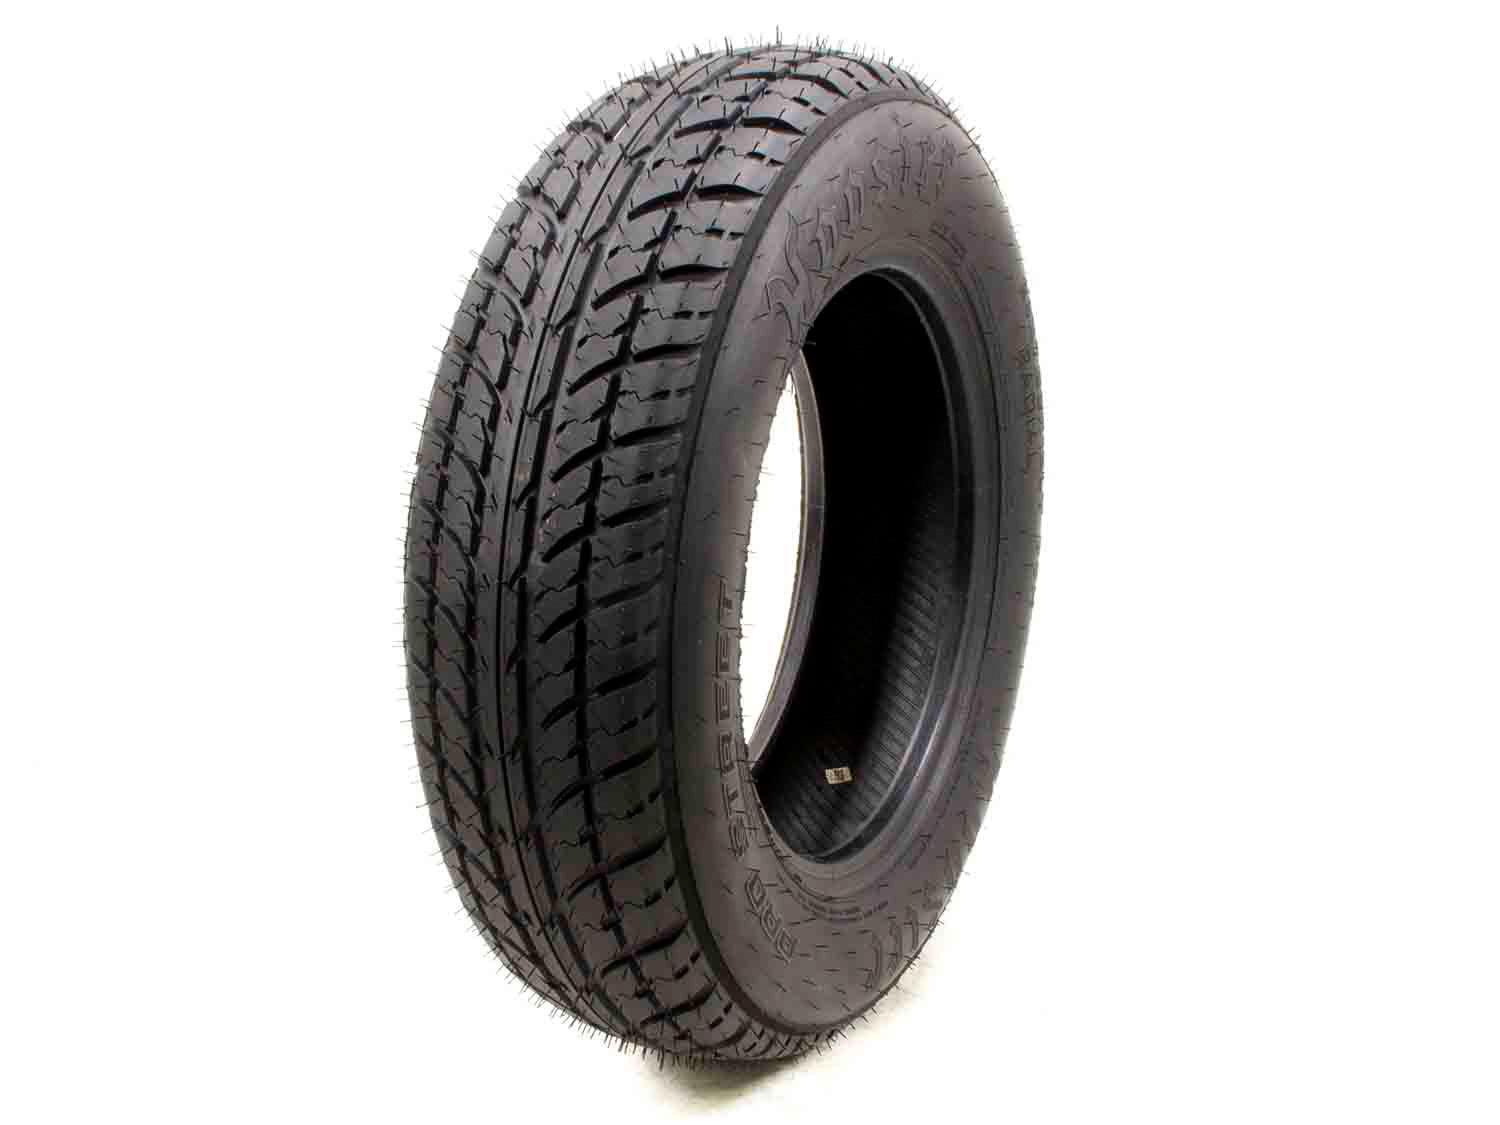 26/7.5R-17LT Pro Street Radial Front Tire - Burlile Performance Products